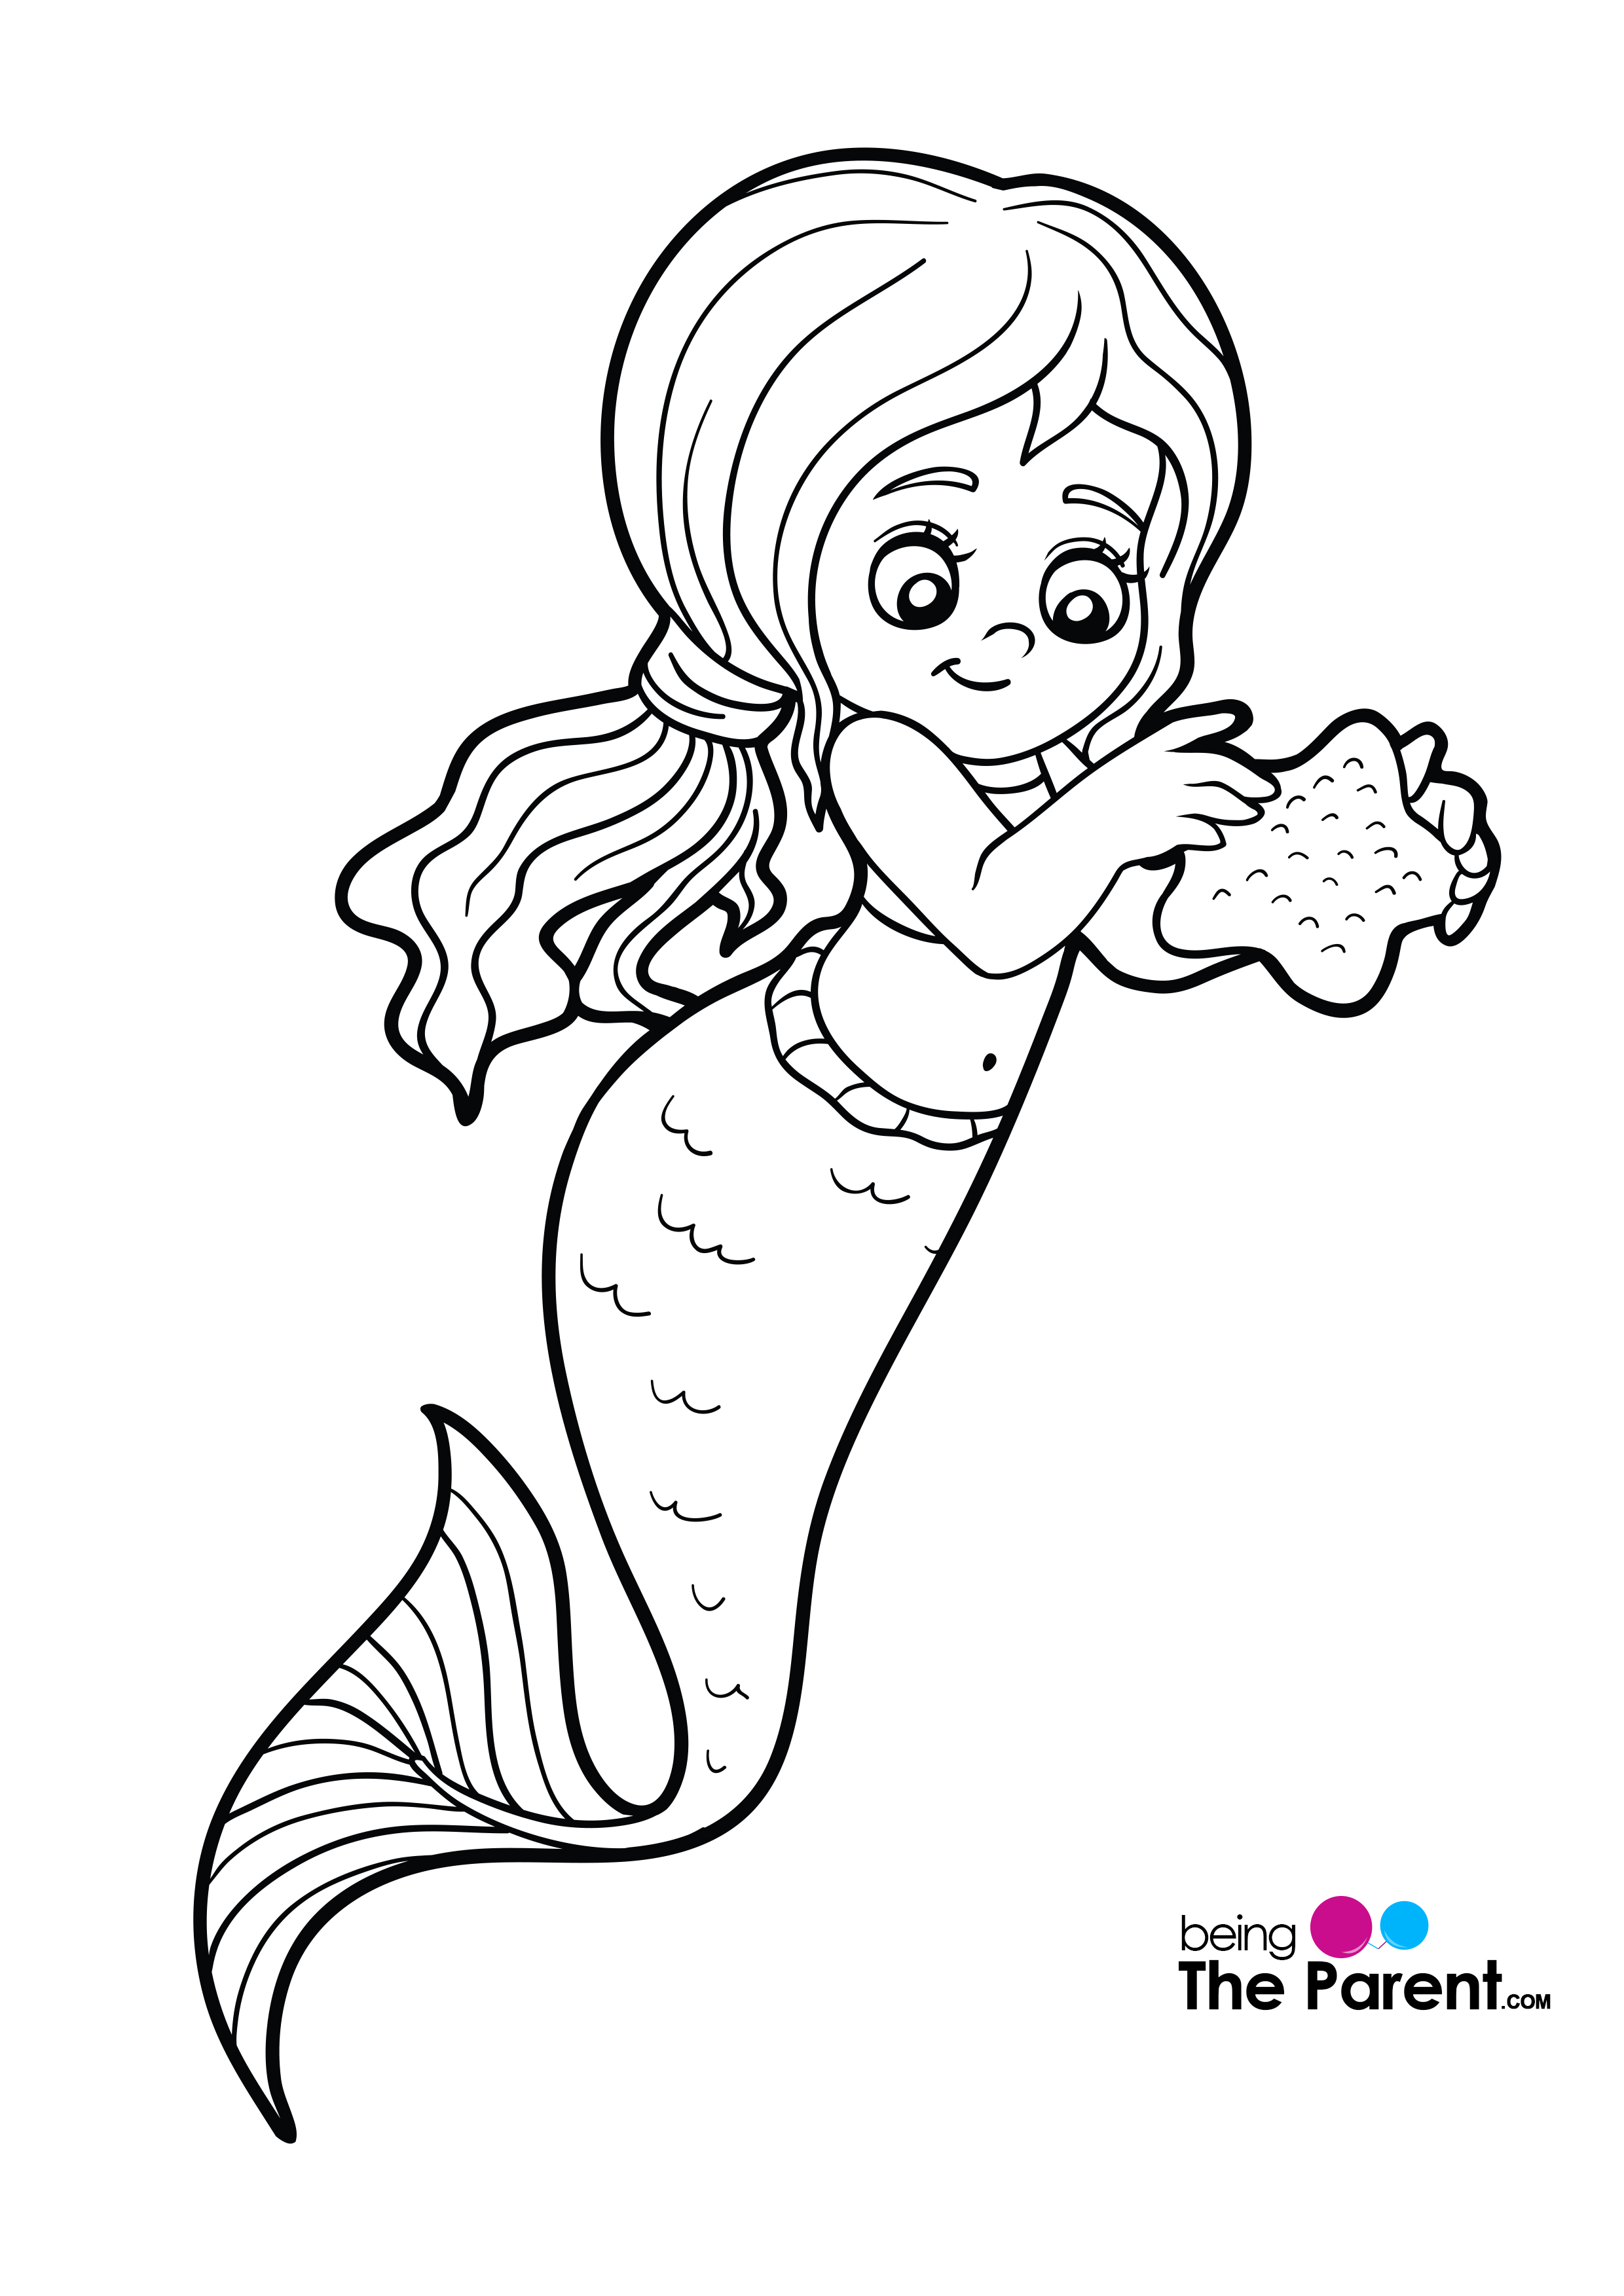 Realistic Mermaid Coloring Pages For Kids Mermaid Coloring Pages Also Teaches Your Kids A Lot